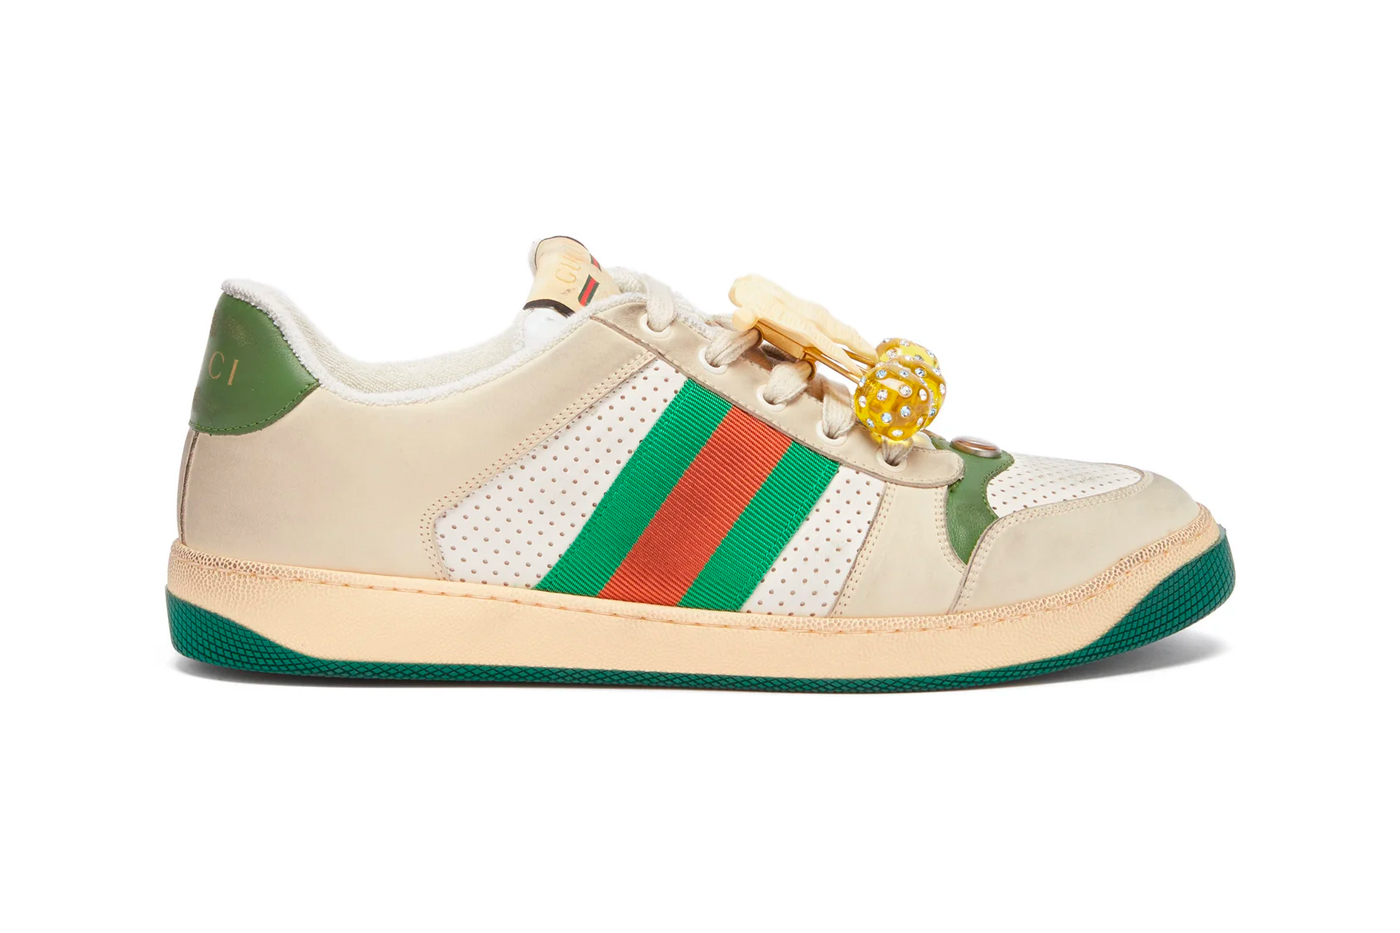 Gucci Cherry-Embellished Screener Trainers Release | Hypebeast